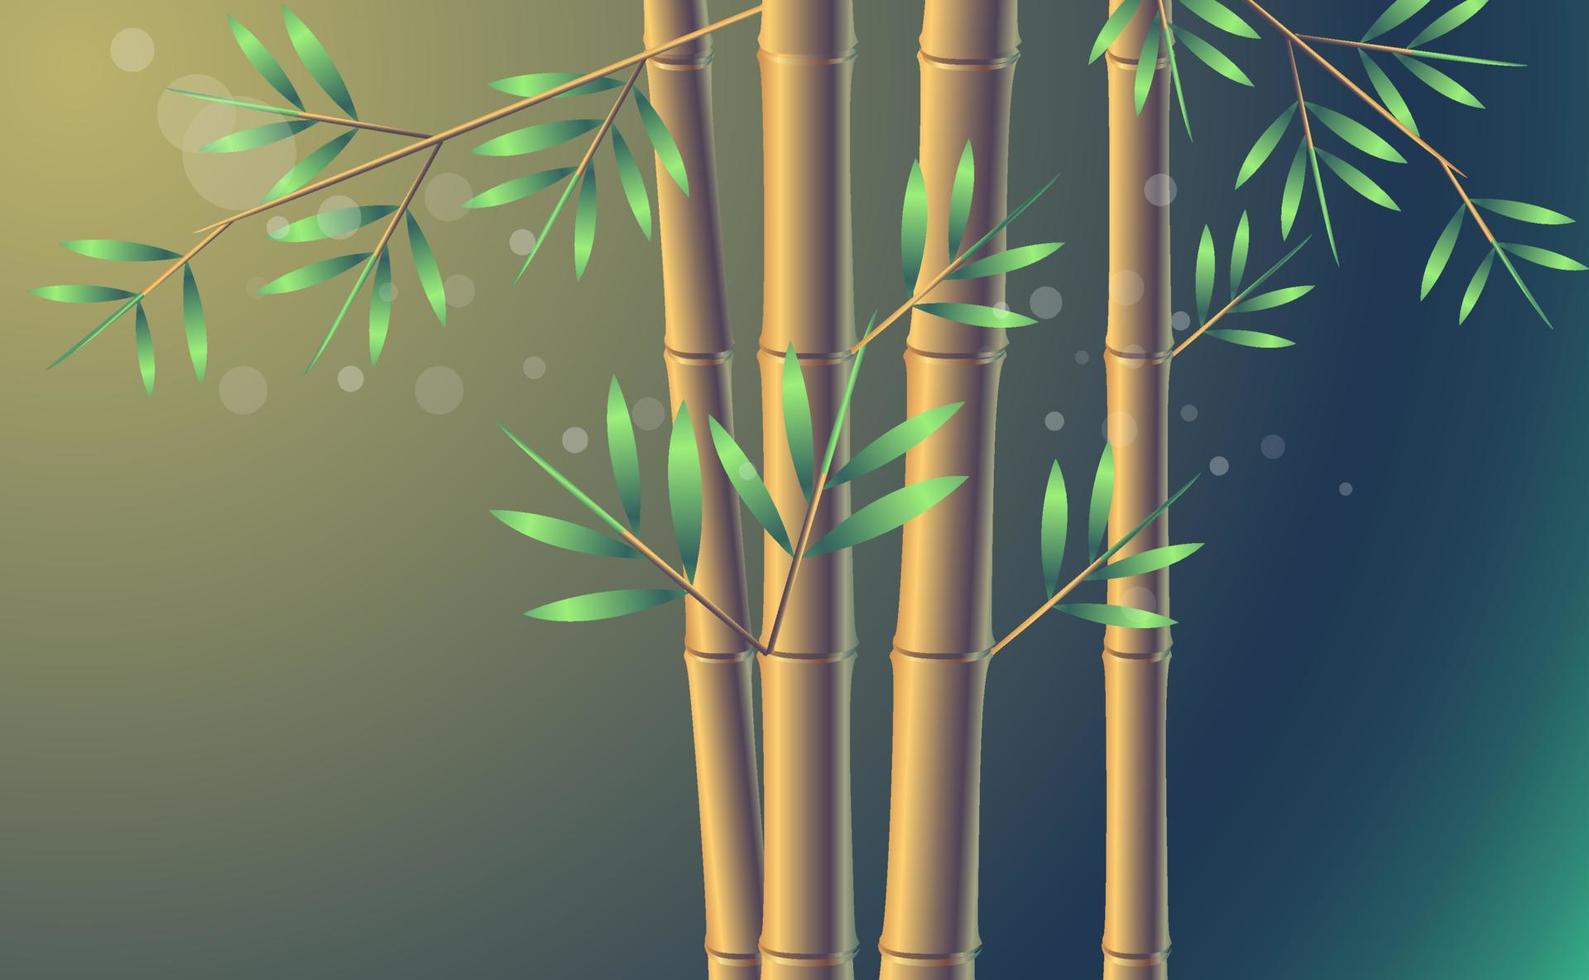 Abstract bamboo background vector